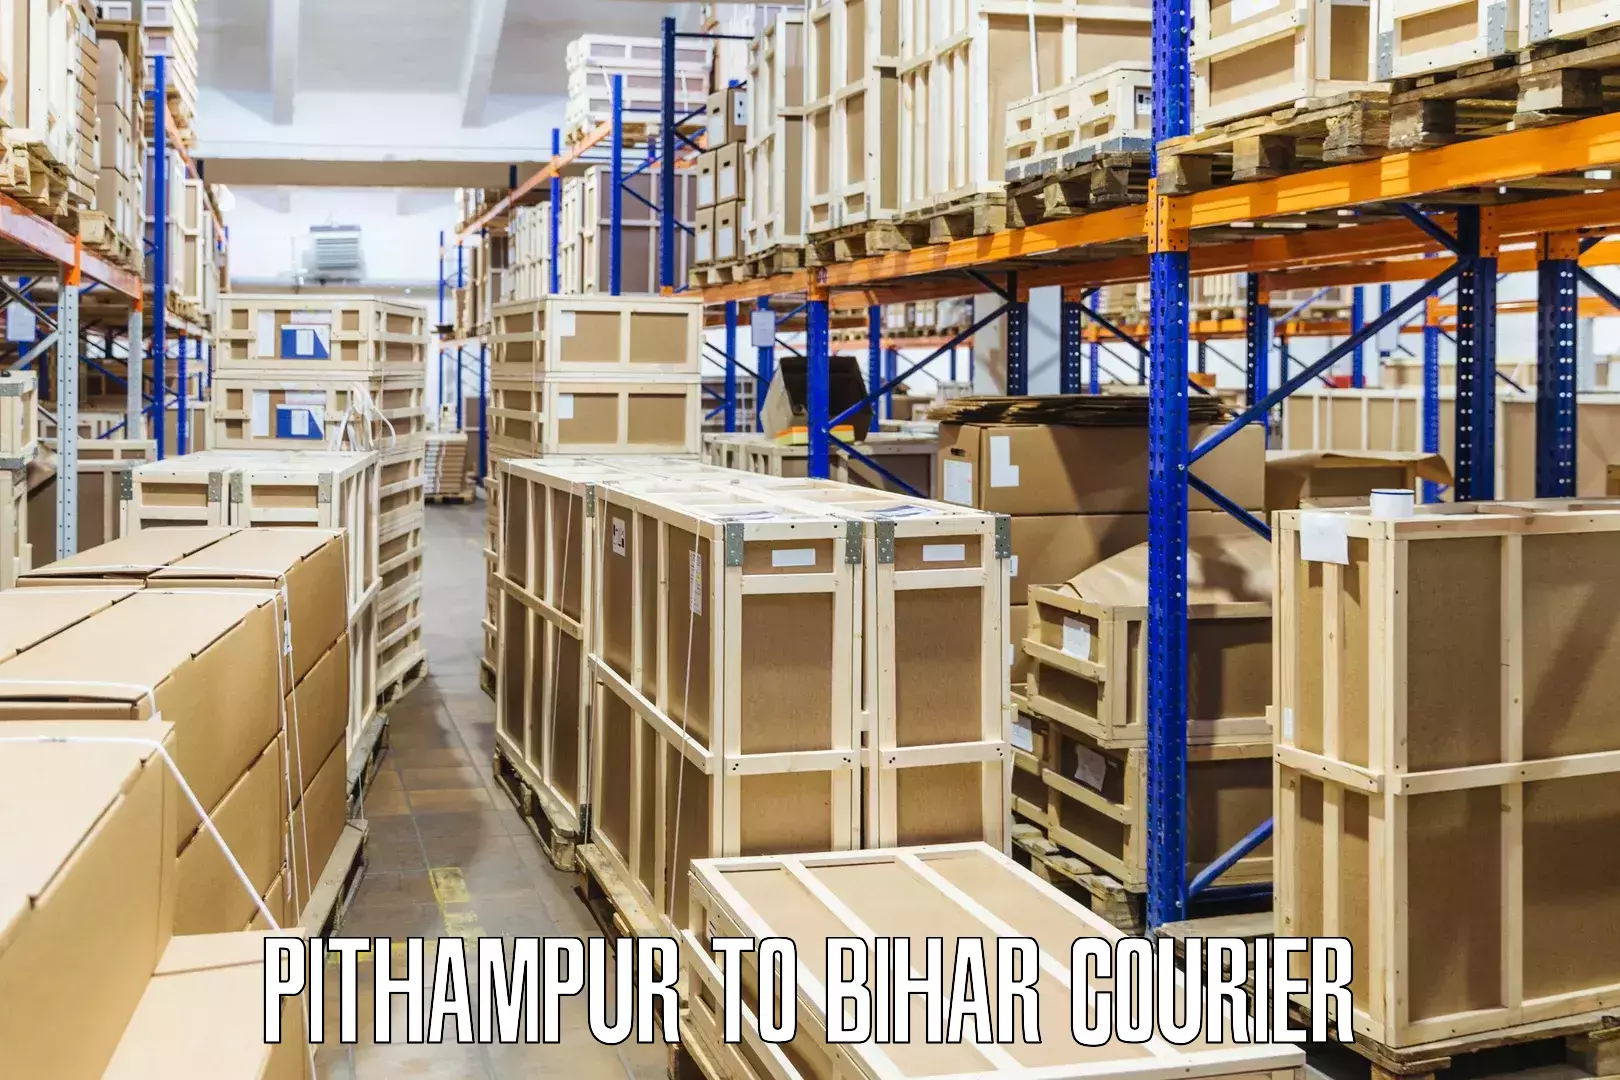 Reliable courier service Pithampur to Bihar